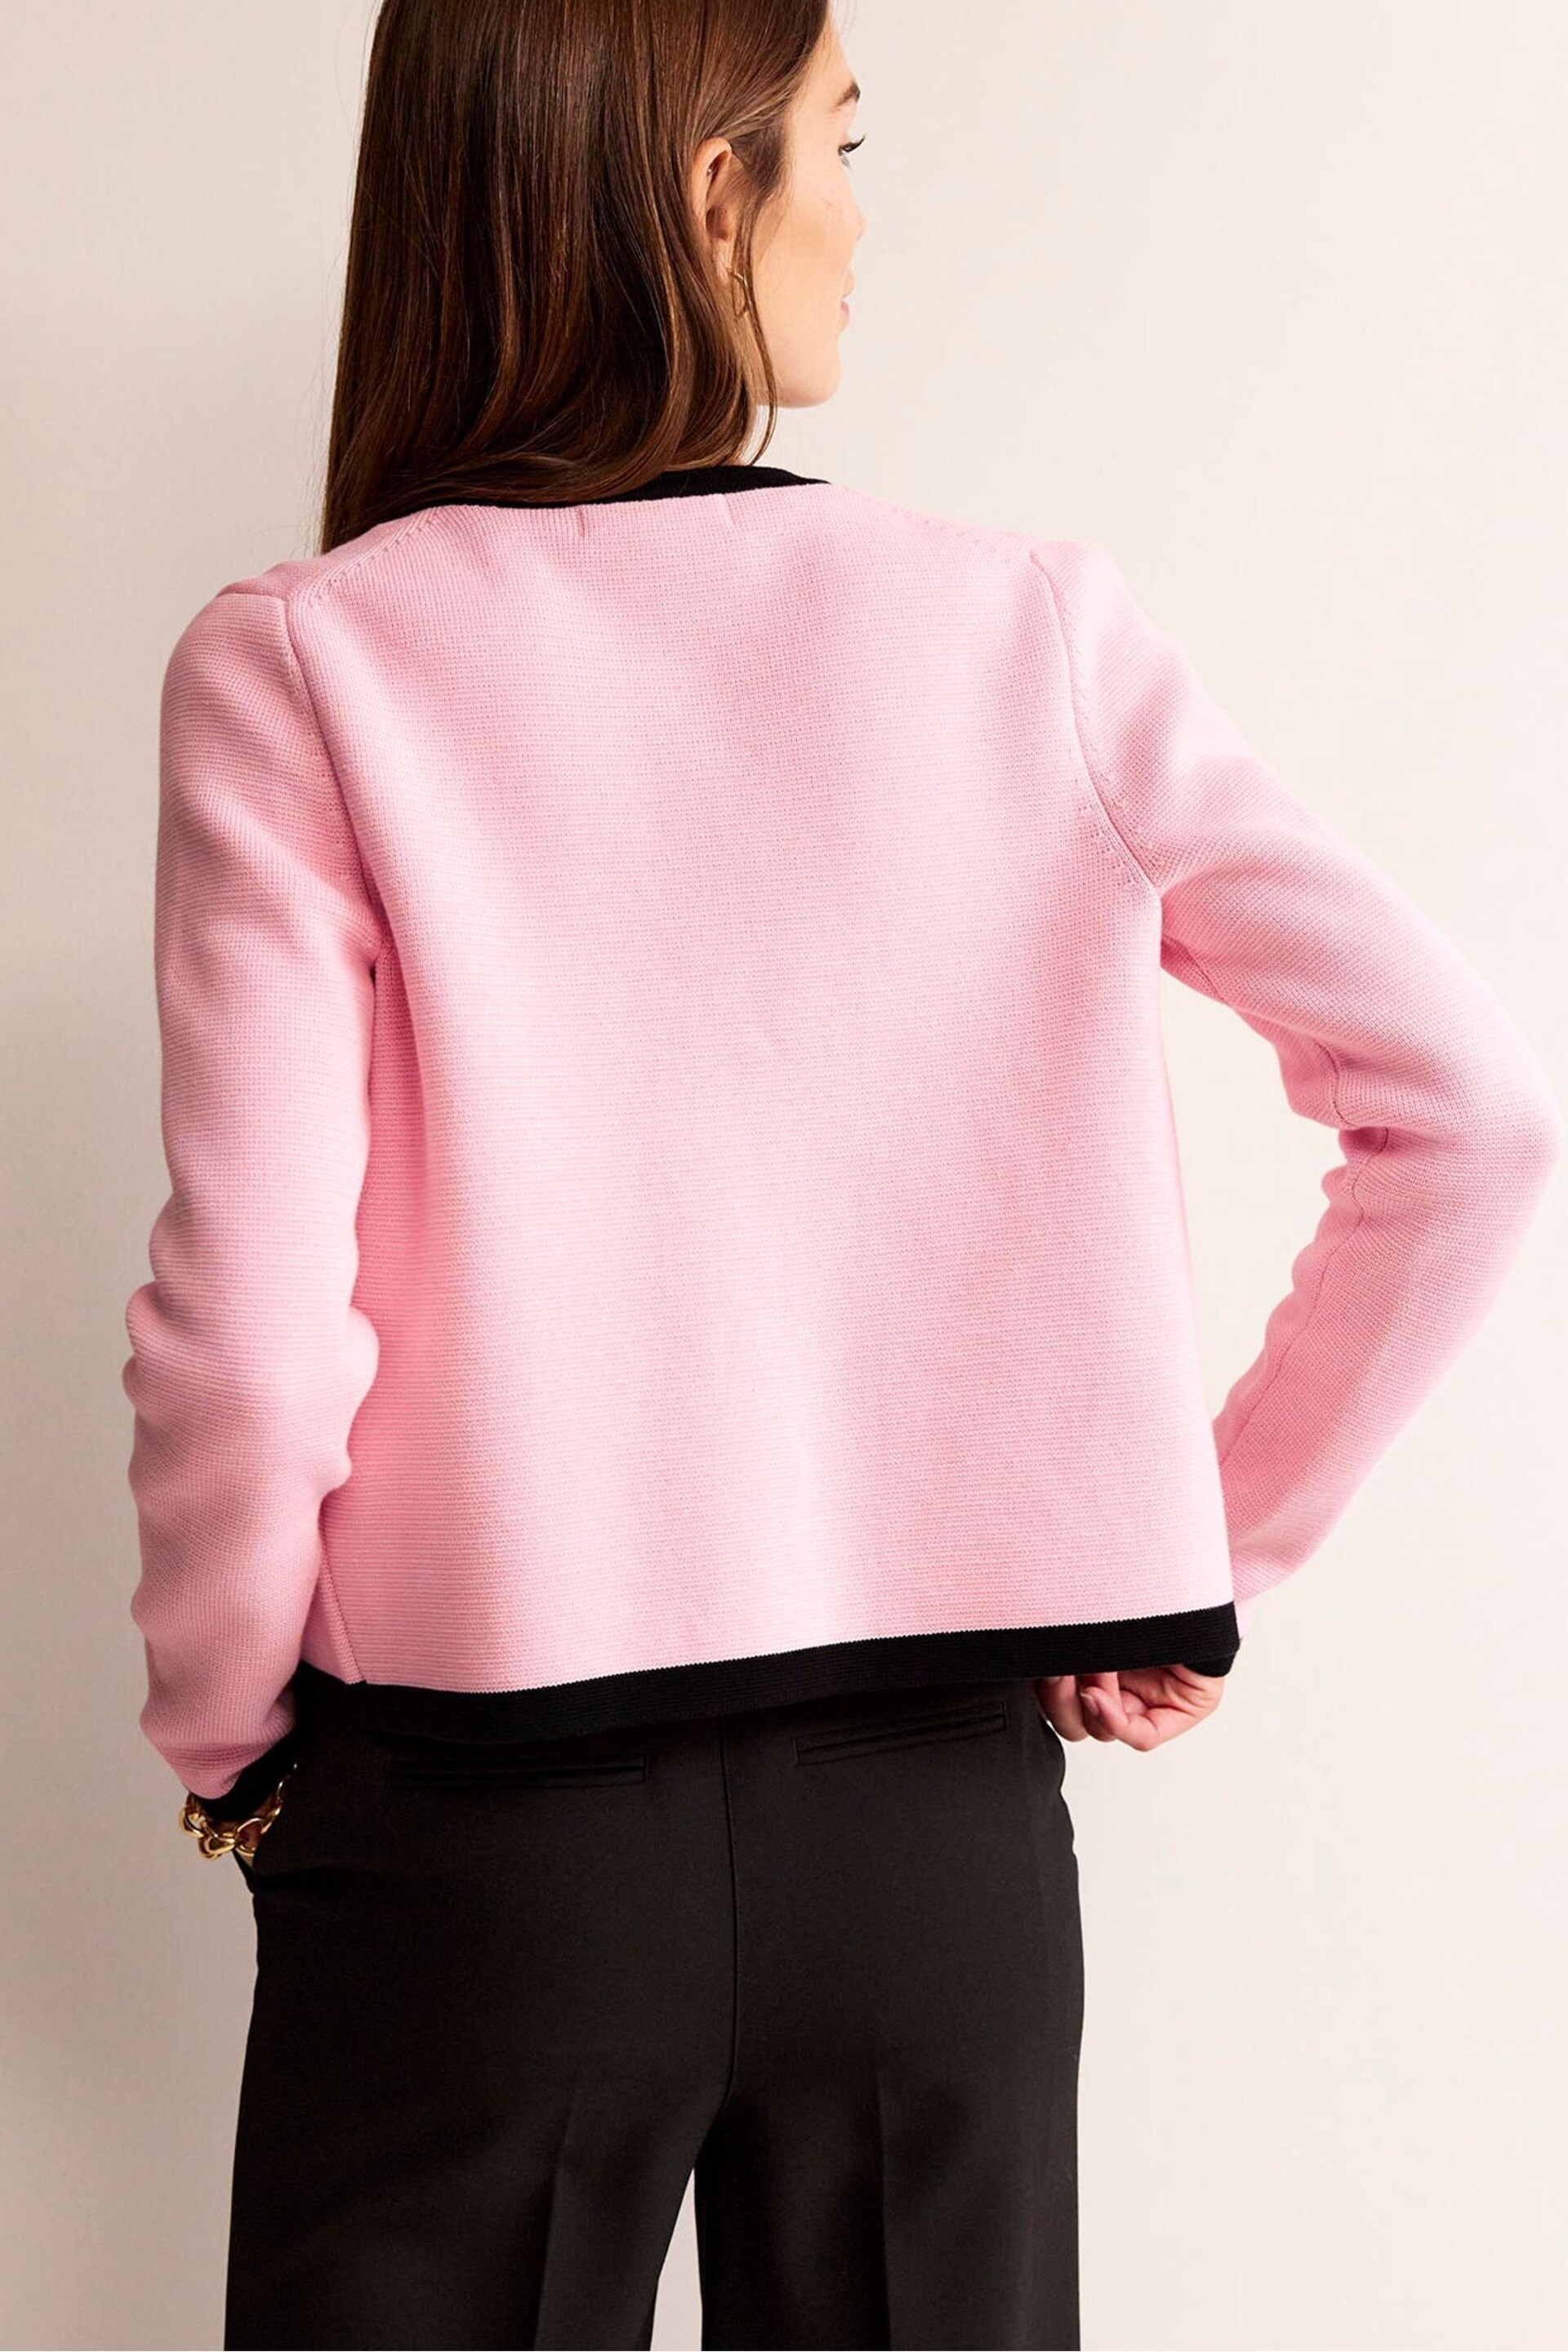 Boden Pink Holly Cropped Knitted Cardigan - Image 3 of 8